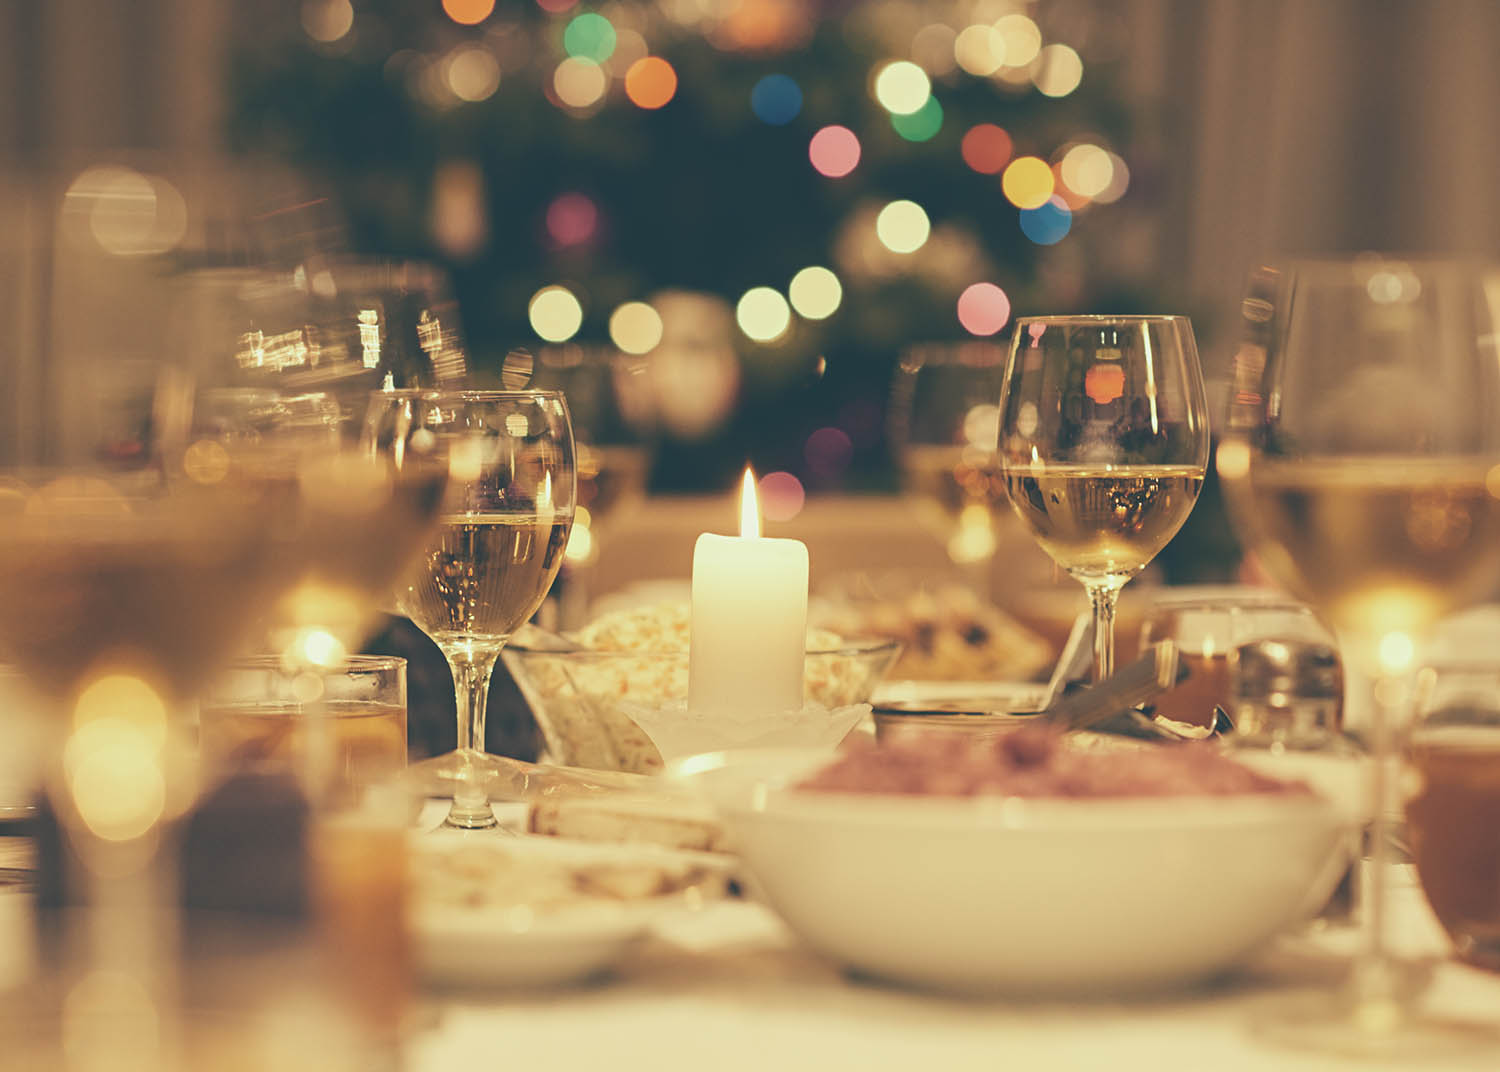 Dining table full of a variety of delicious festive food and wine with a Christmas tree in the background in home with vintage style